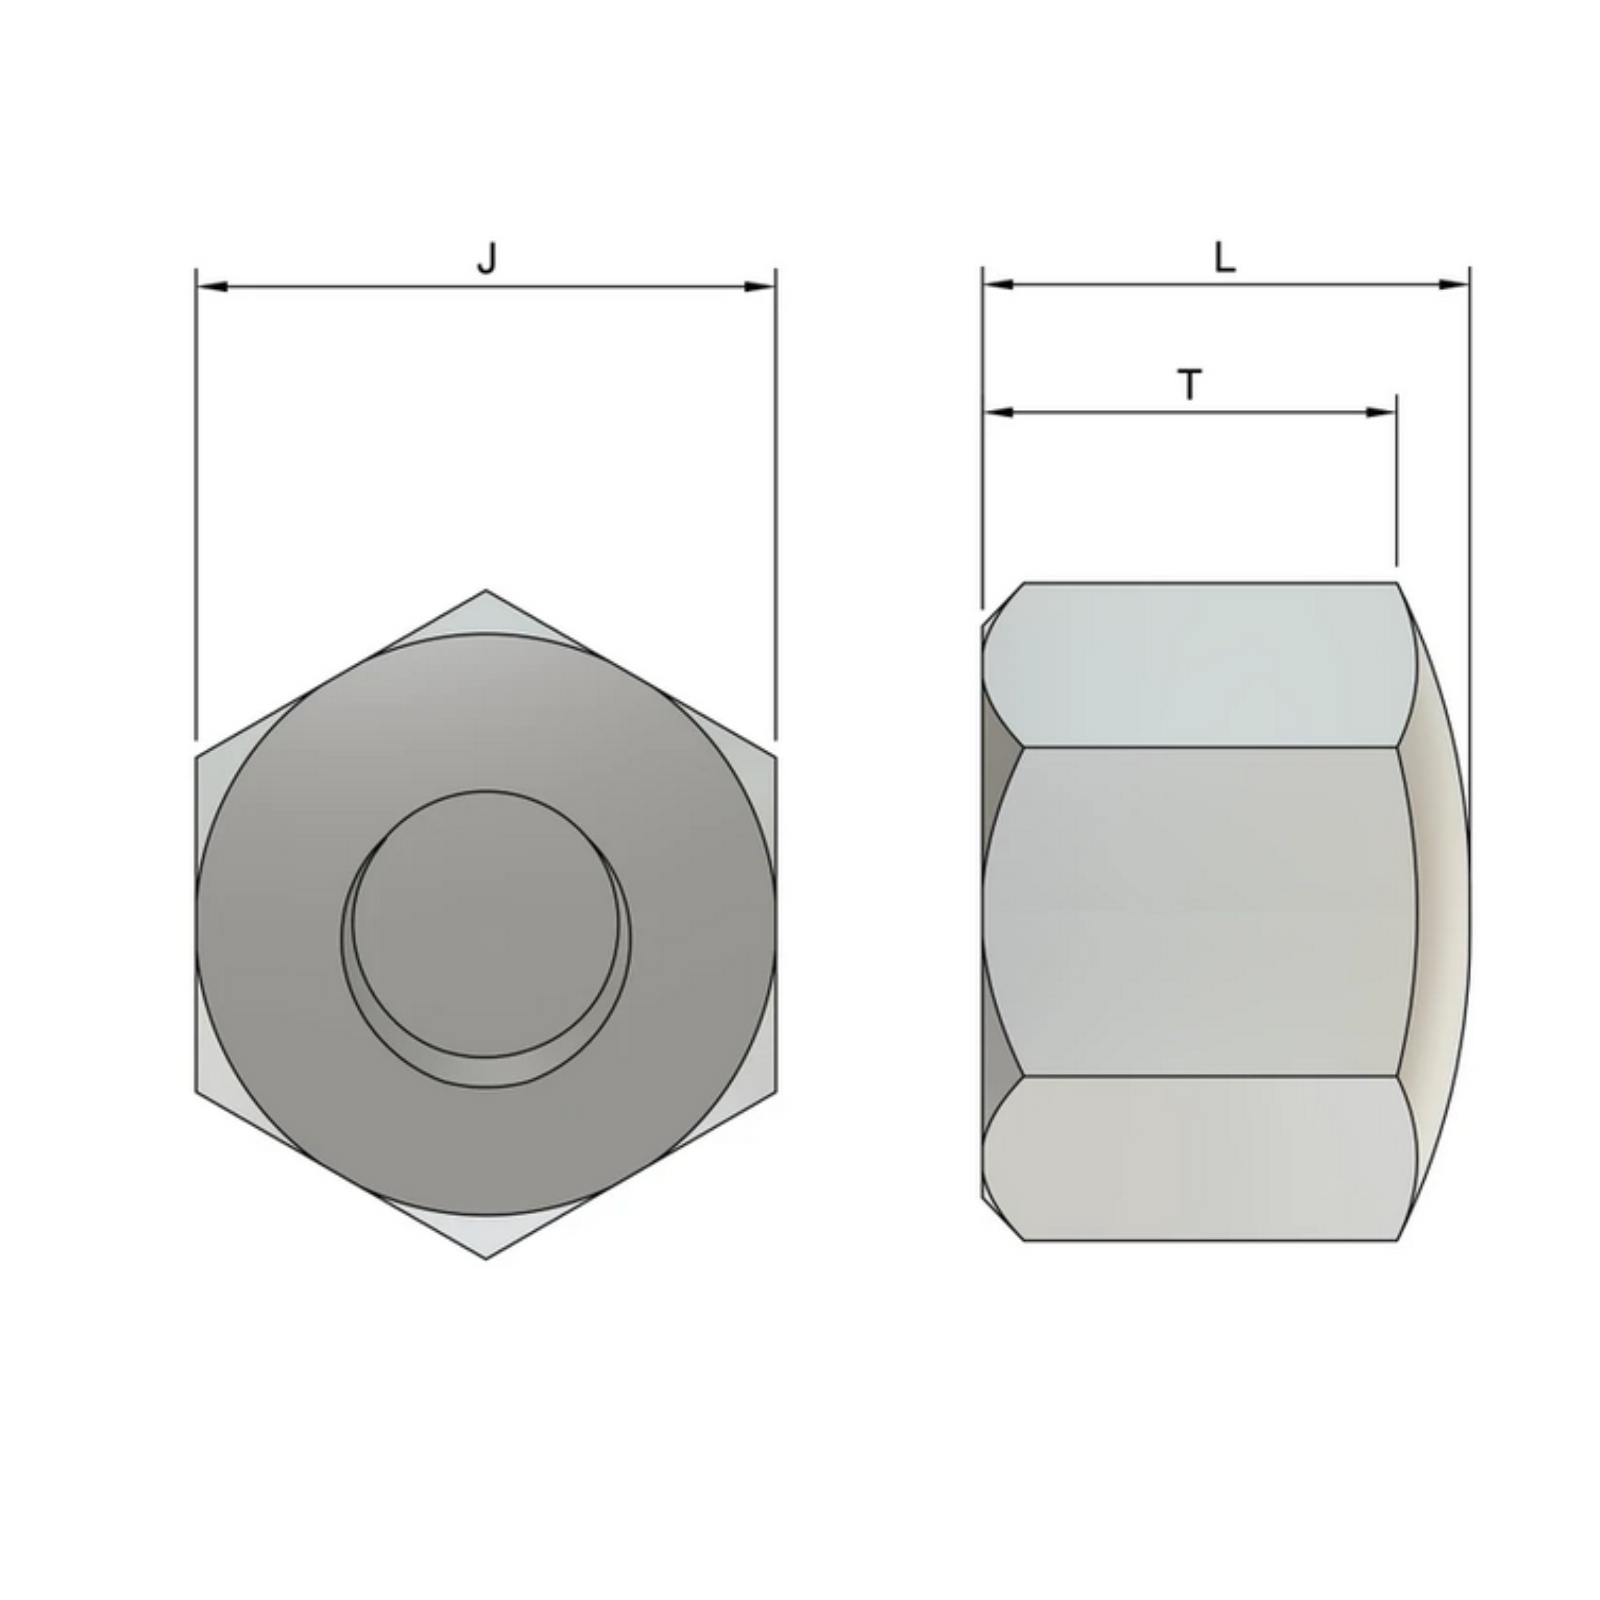 M8 Cap Nuts (DIN 917) - Stainless Steel (A2)